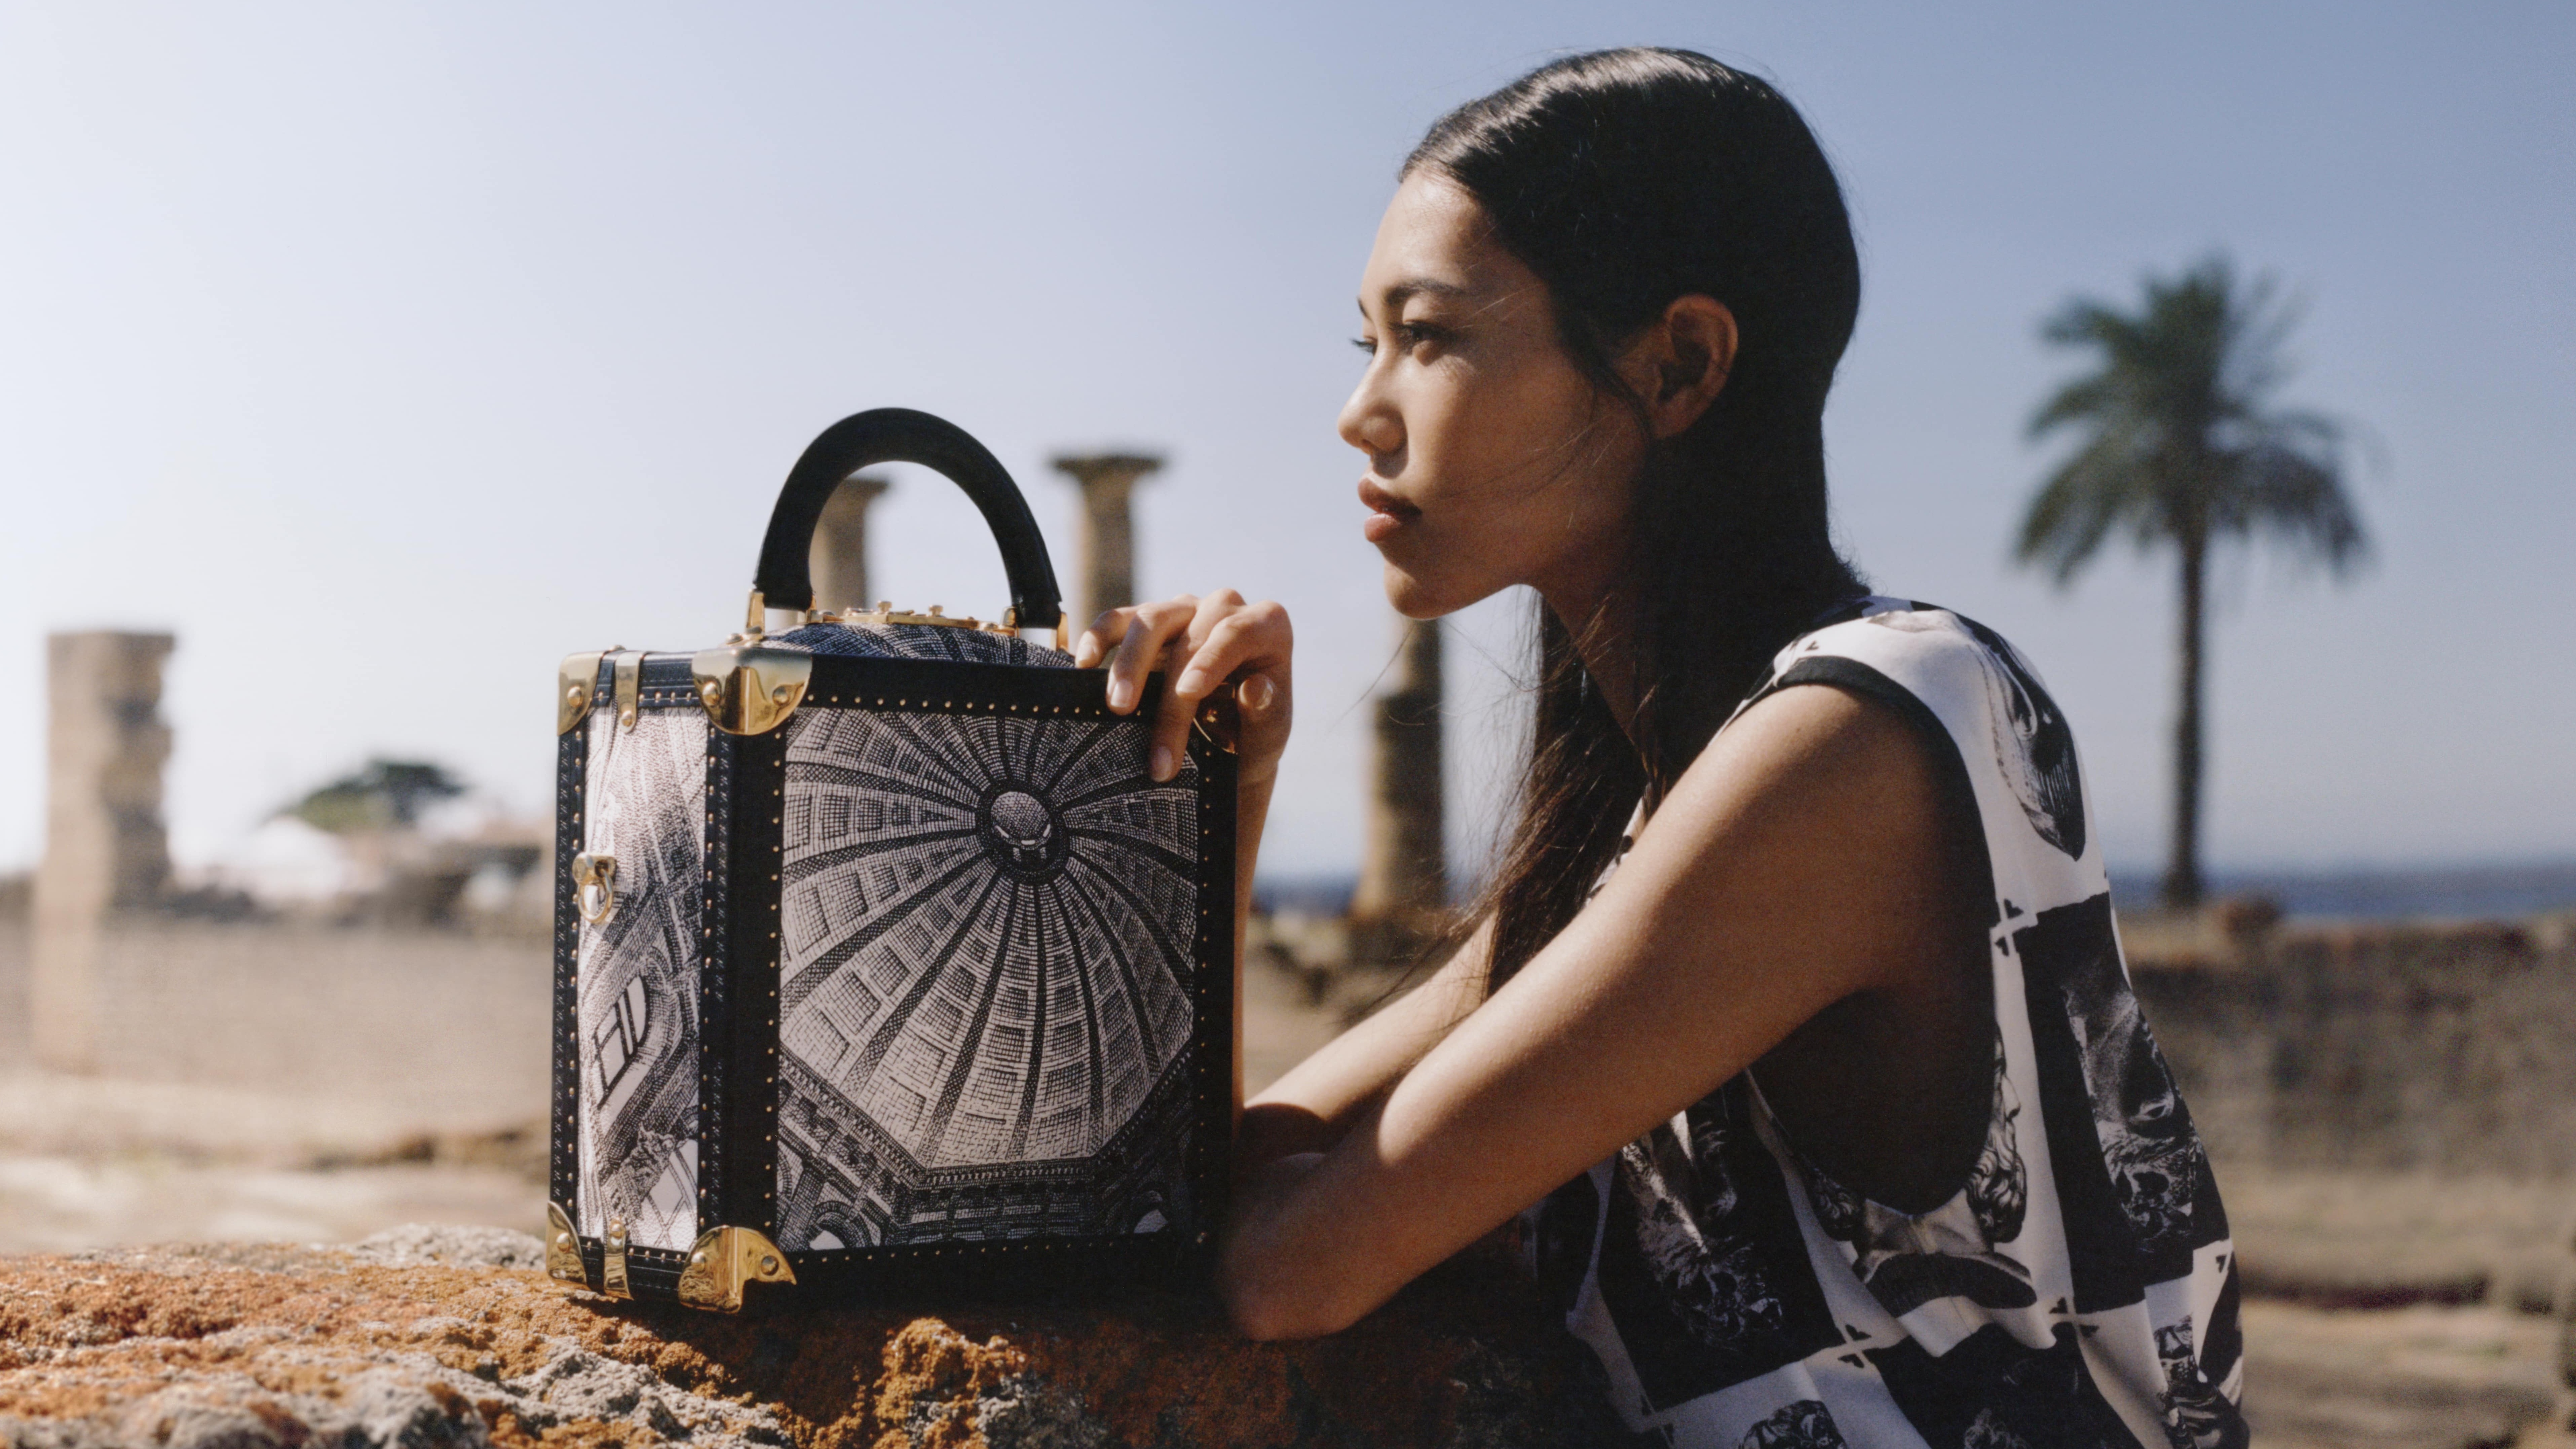 A Look At The Louis Vuitton x Fornasetti Collab You'll Be Coveting